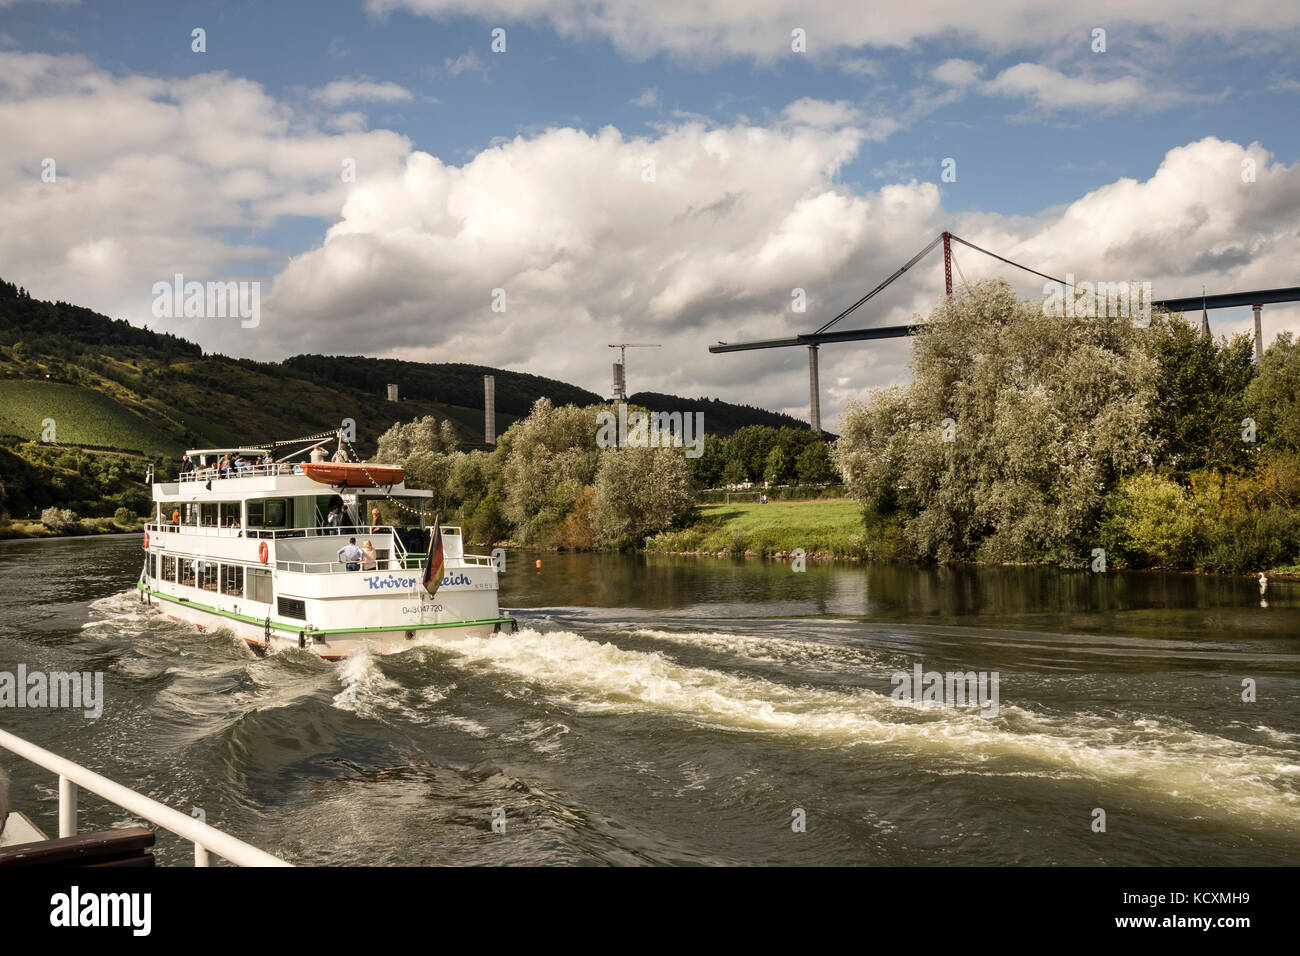 The pleasure boat Krover Reich on the Mosel River, Urzig, Germany Stock Photo